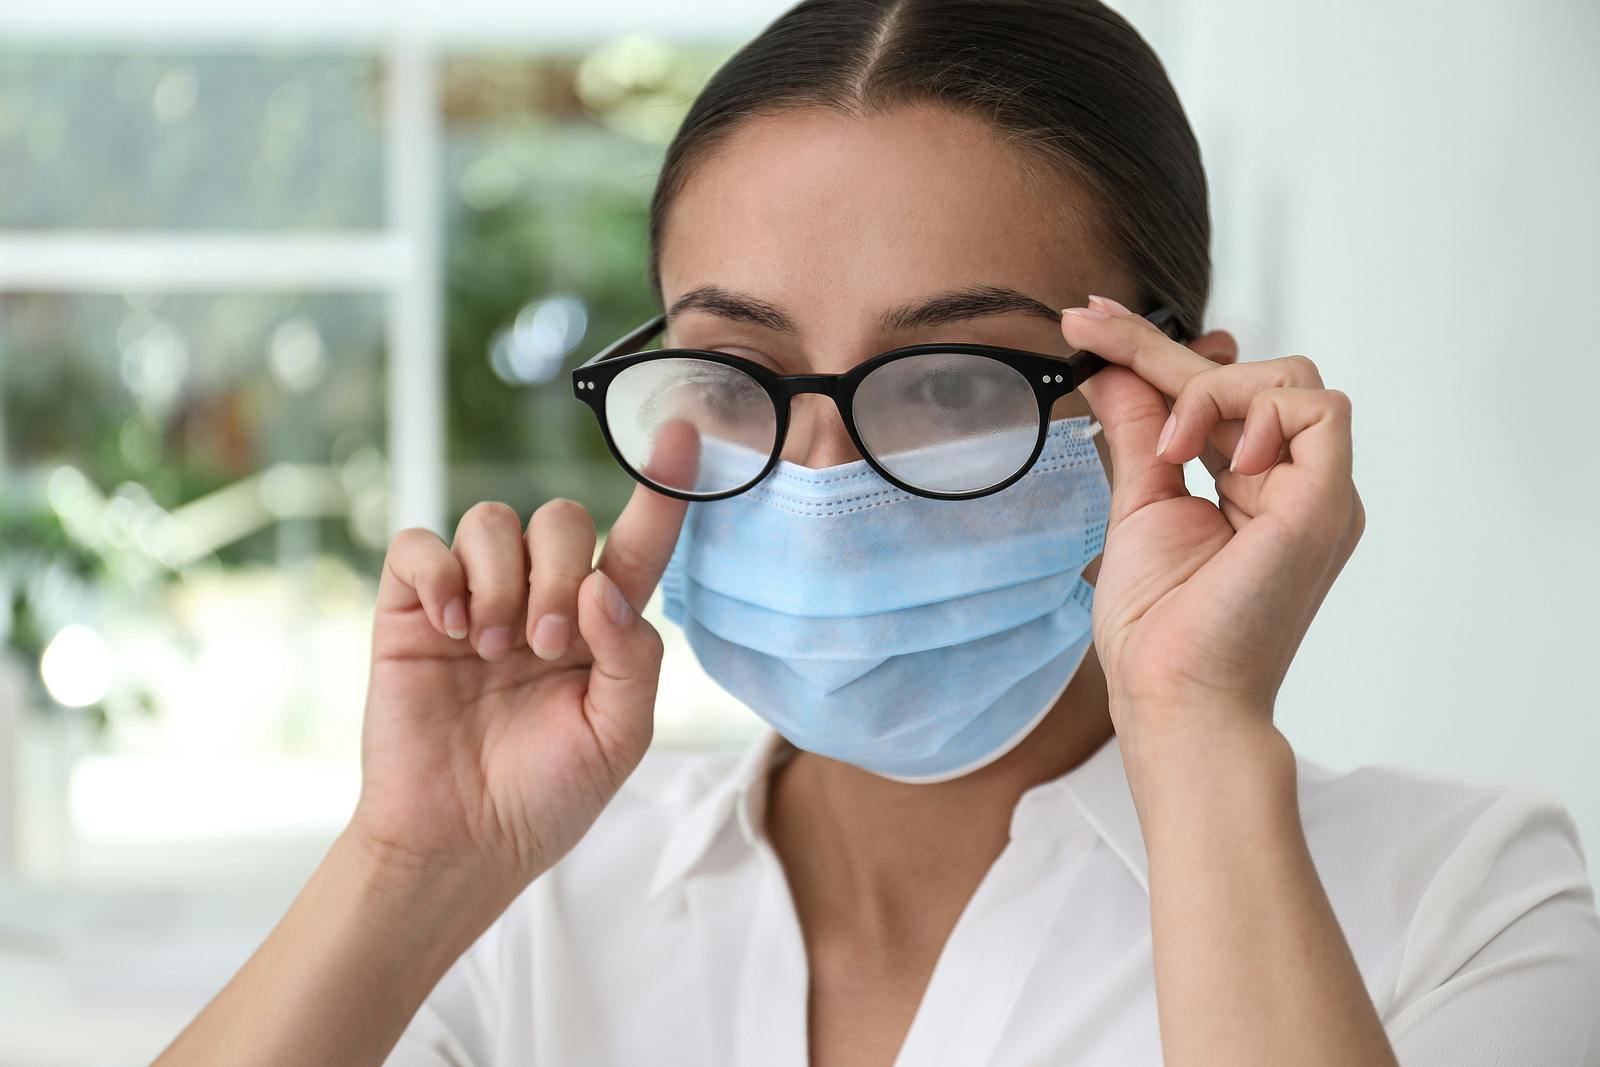 Woman wiping foggy glasses caused by wearing medical mask indoors, closeup
